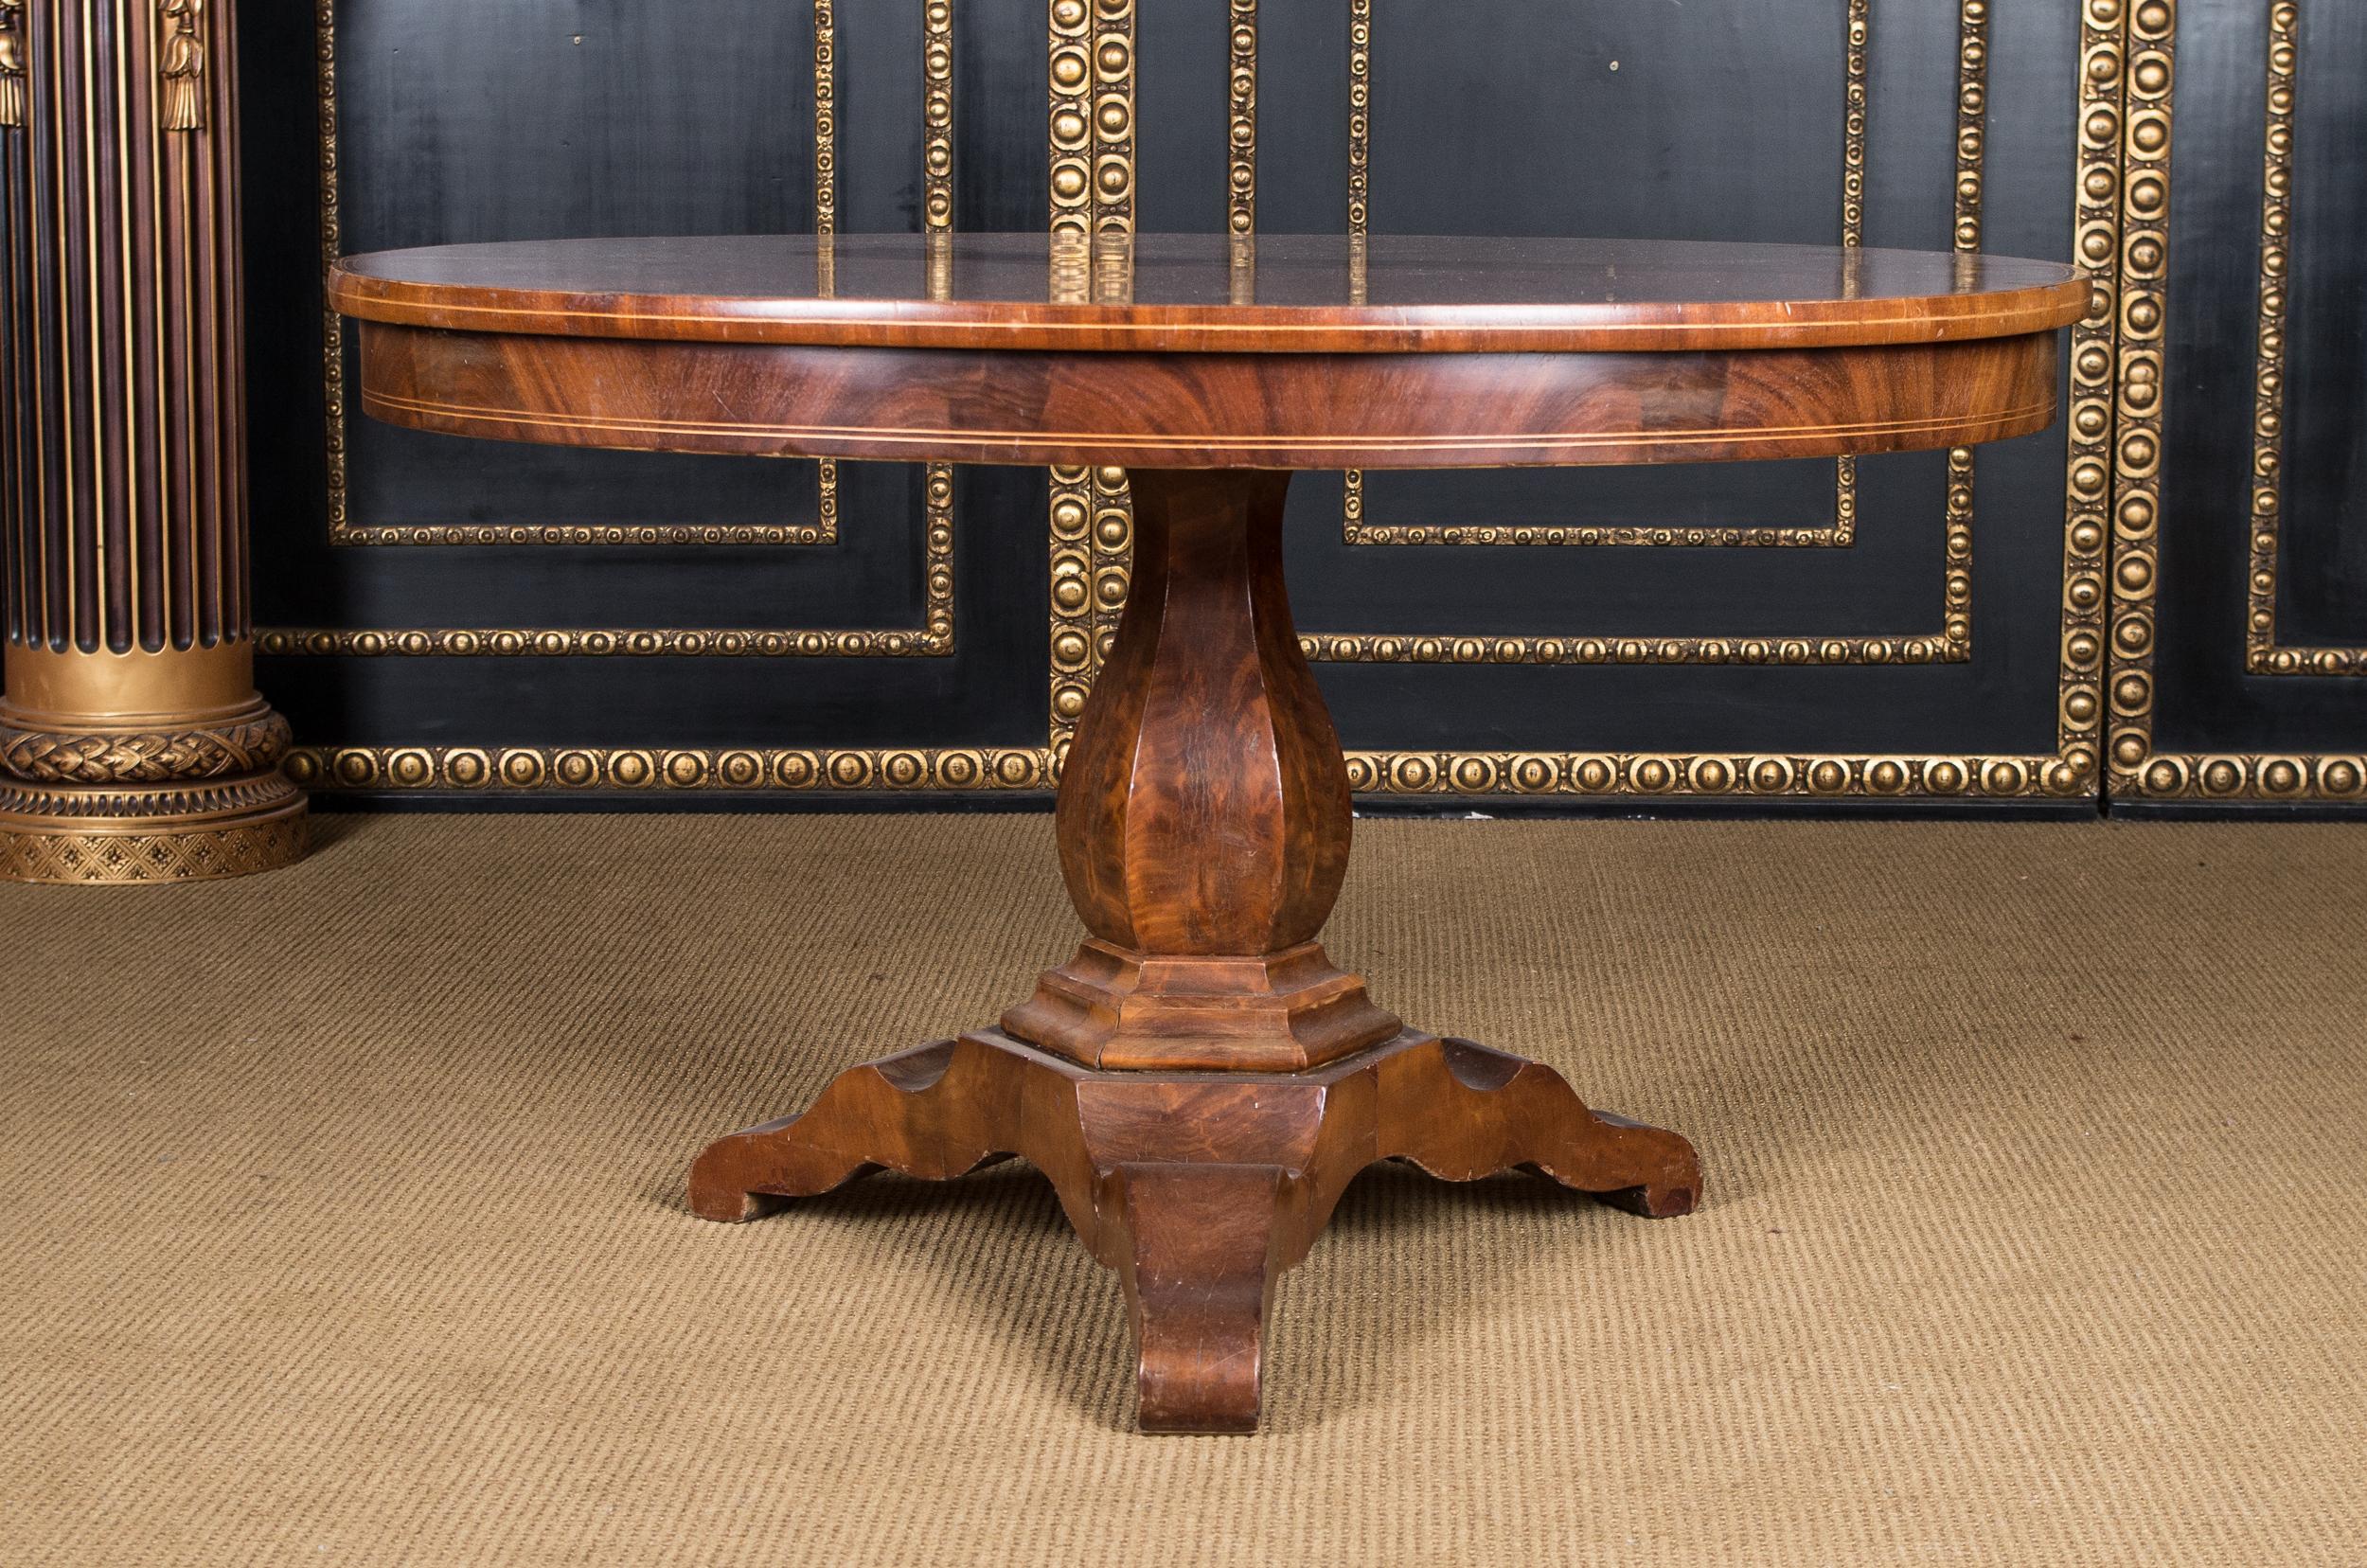 Original Biedermeier table, circa 1820. Solid softwood. Cuba mahogany veneer. Oval plate on hexagonal shaft on draw-in base plate and with three legs.